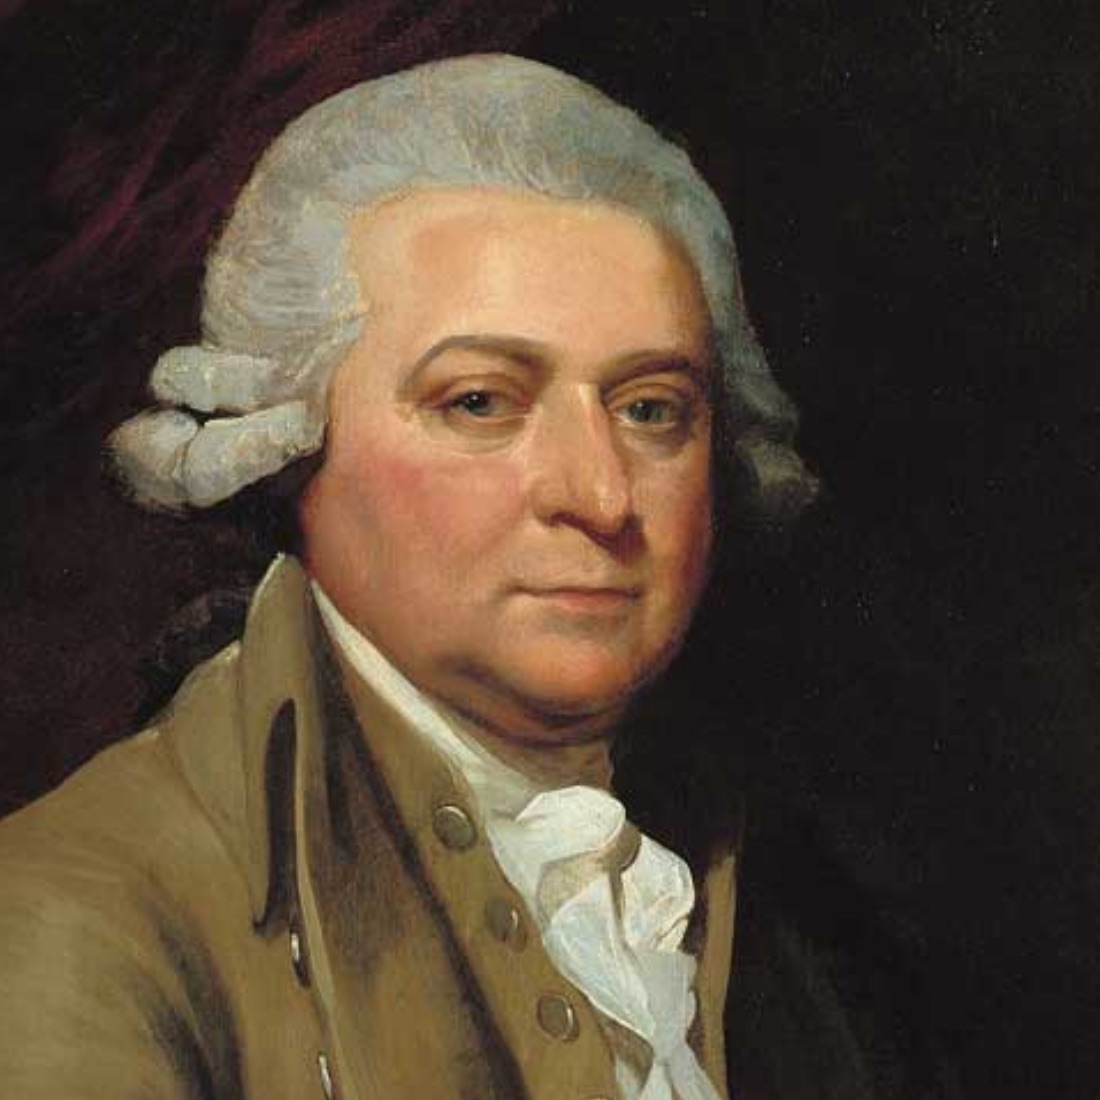 John Adams sat for this portrait by Mather Brown in London. Adams is the subject of the biography that is the focus of this Revolutionary Characters lesson.